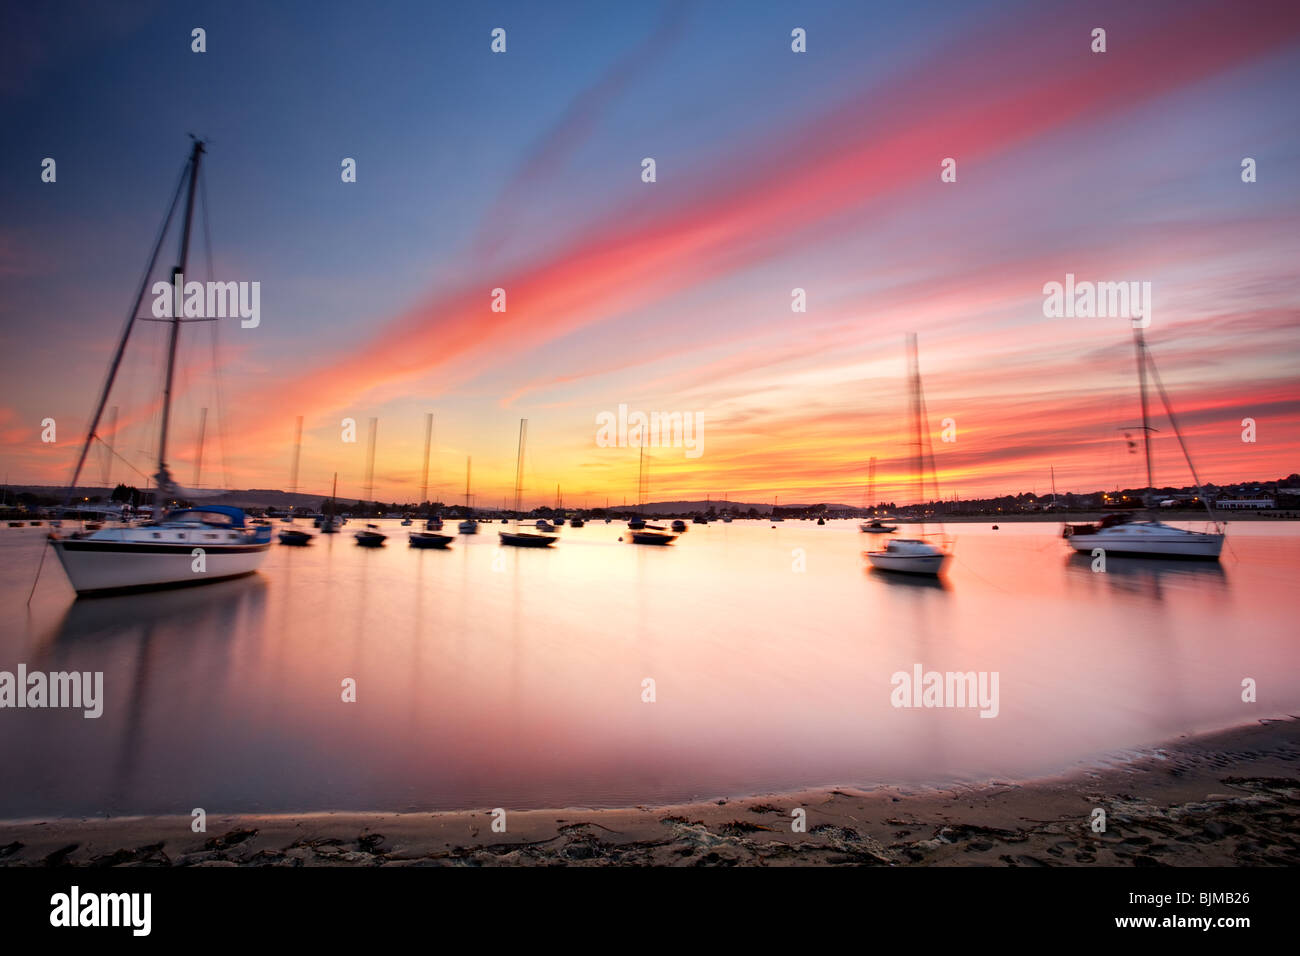 Sun setting over boats in Bembridge Harbour. Isle of Wight, England, UK Stock Photo